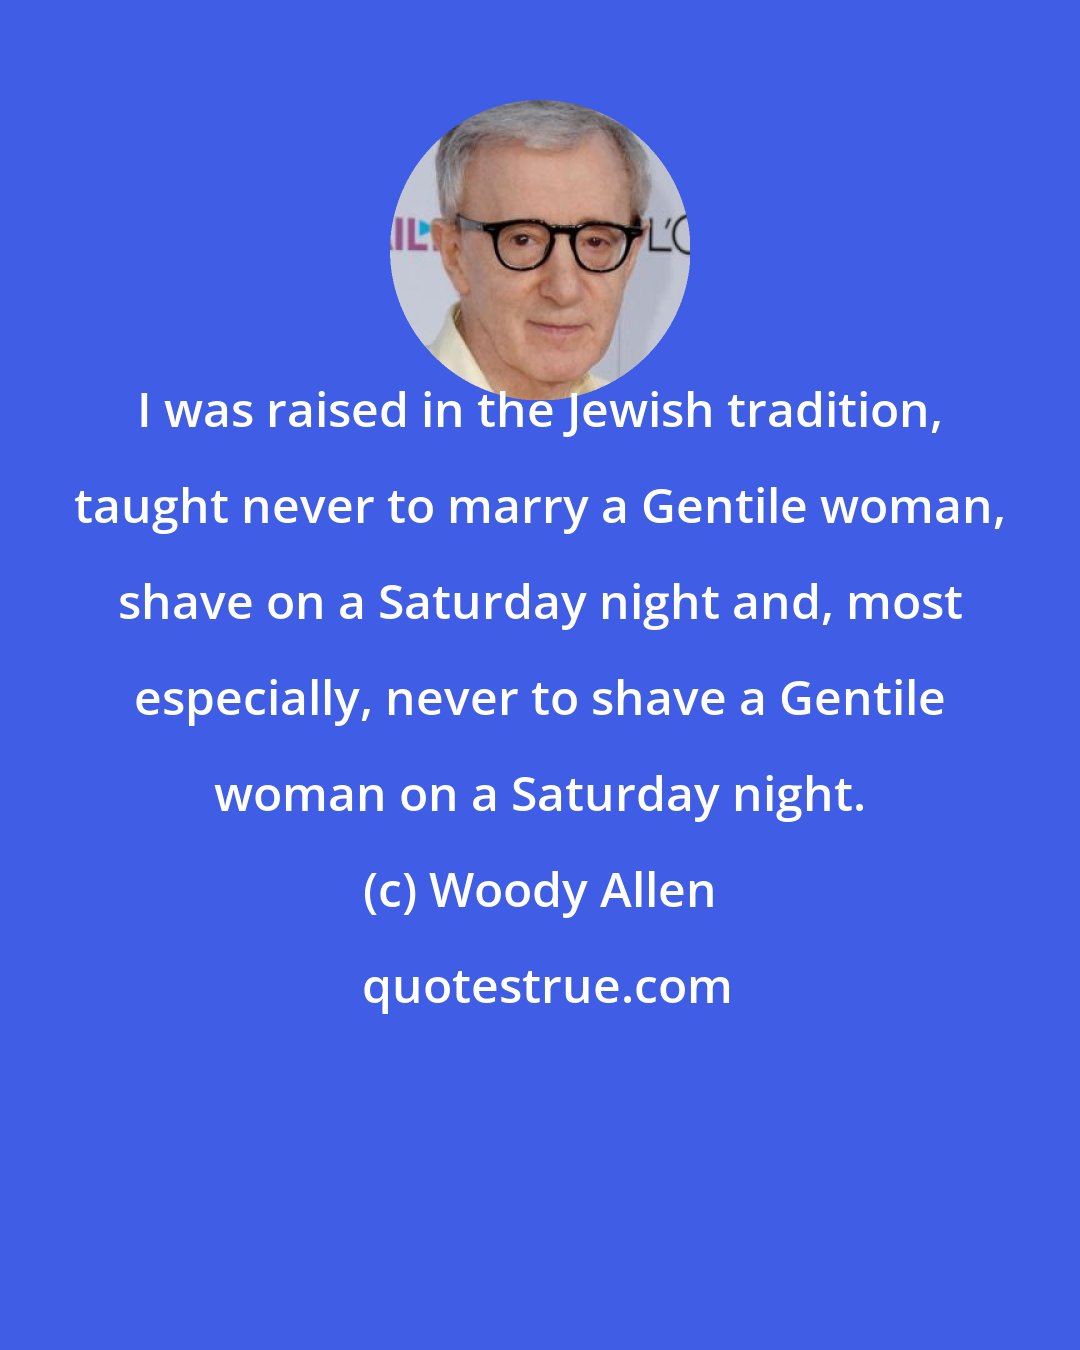 Woody Allen: I was raised in the Jewish tradition, taught never to marry a Gentile woman, shave on a Saturday night and, most especially, never to shave a Gentile woman on a Saturday night.